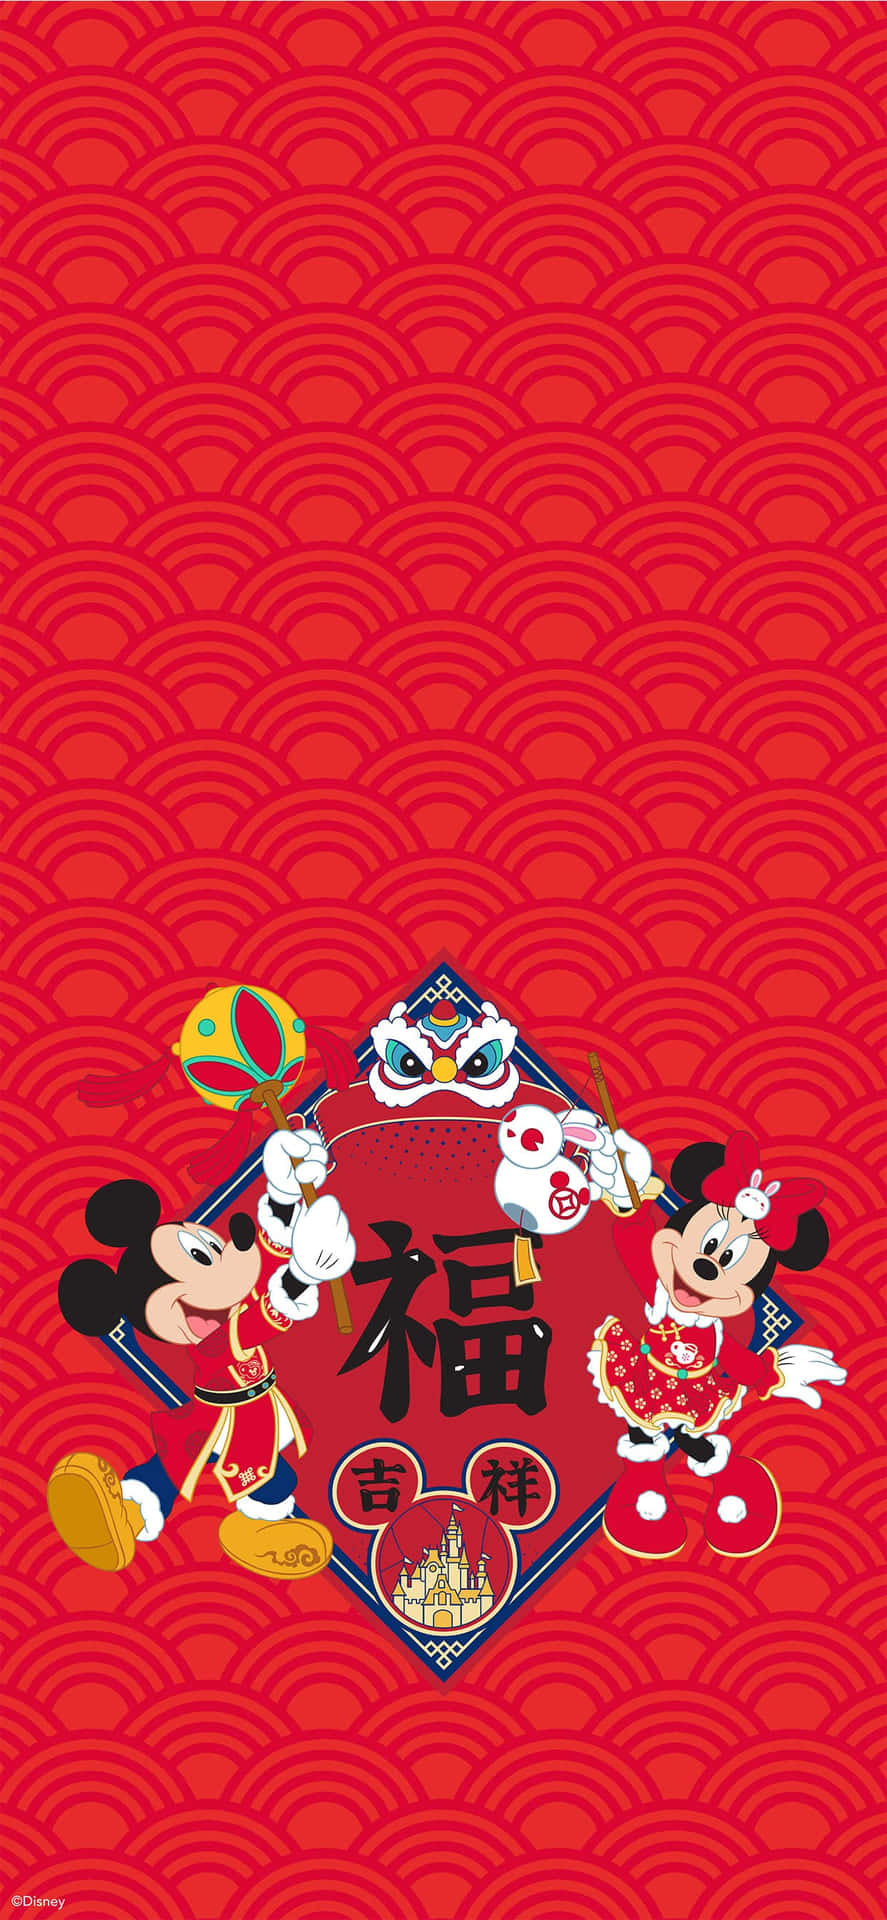 "Let's Celebrate the new Year with Mickey and Minnie Mouse!" Wallpaper